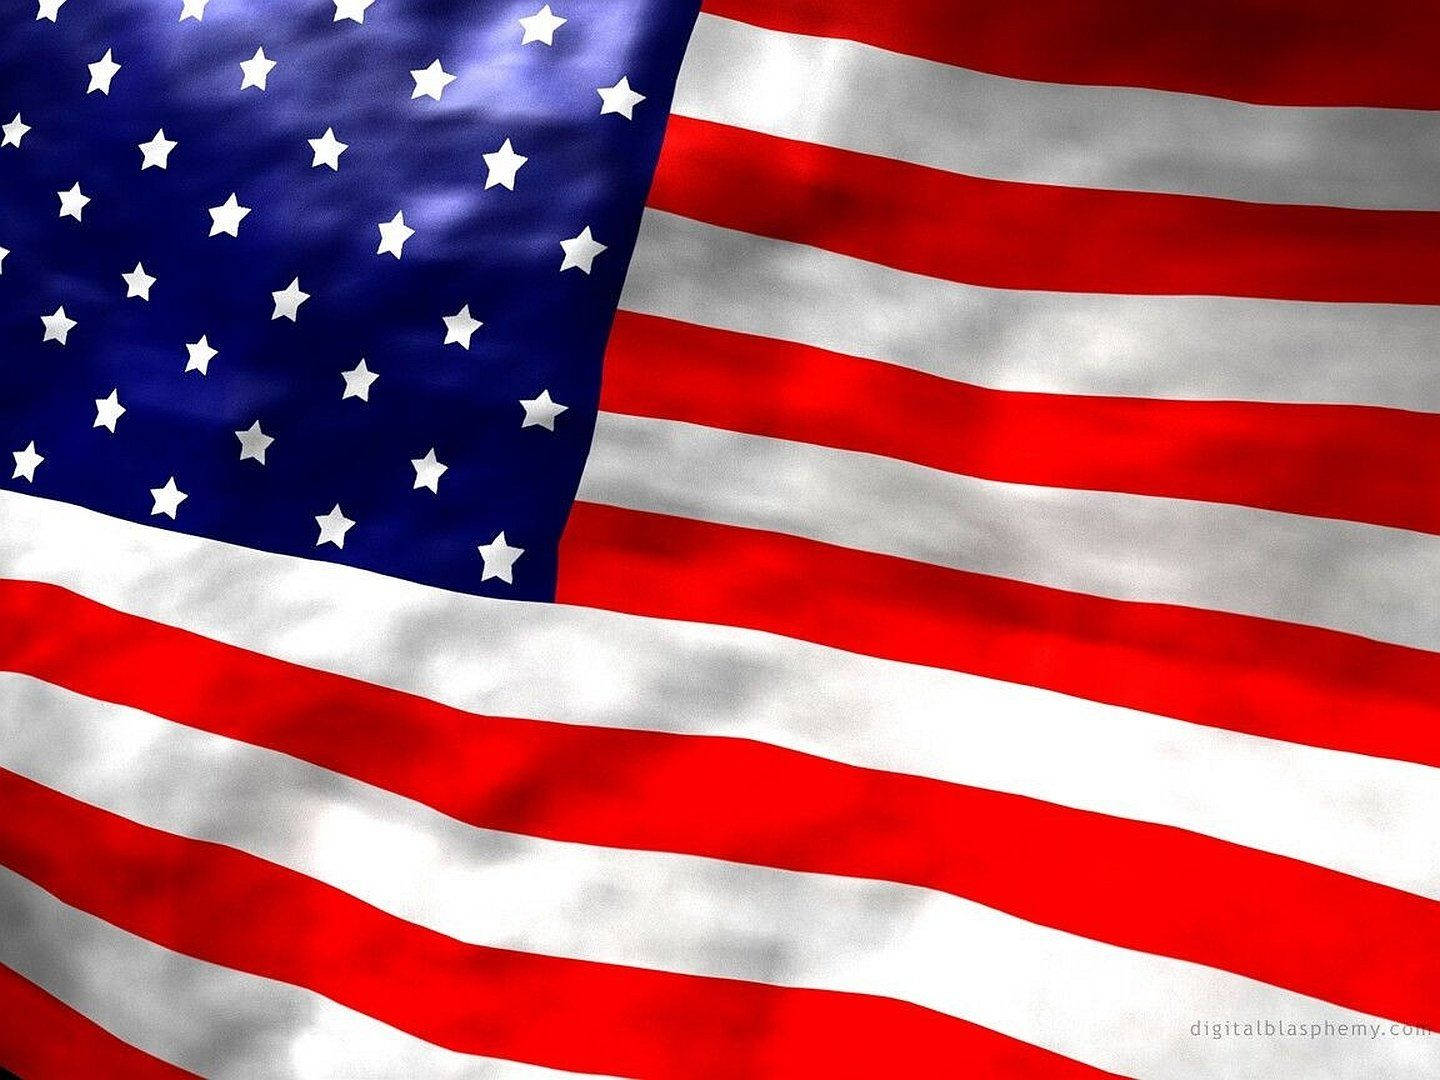 Celebrate the United States of America with This Patriotic Flag Wallpaper